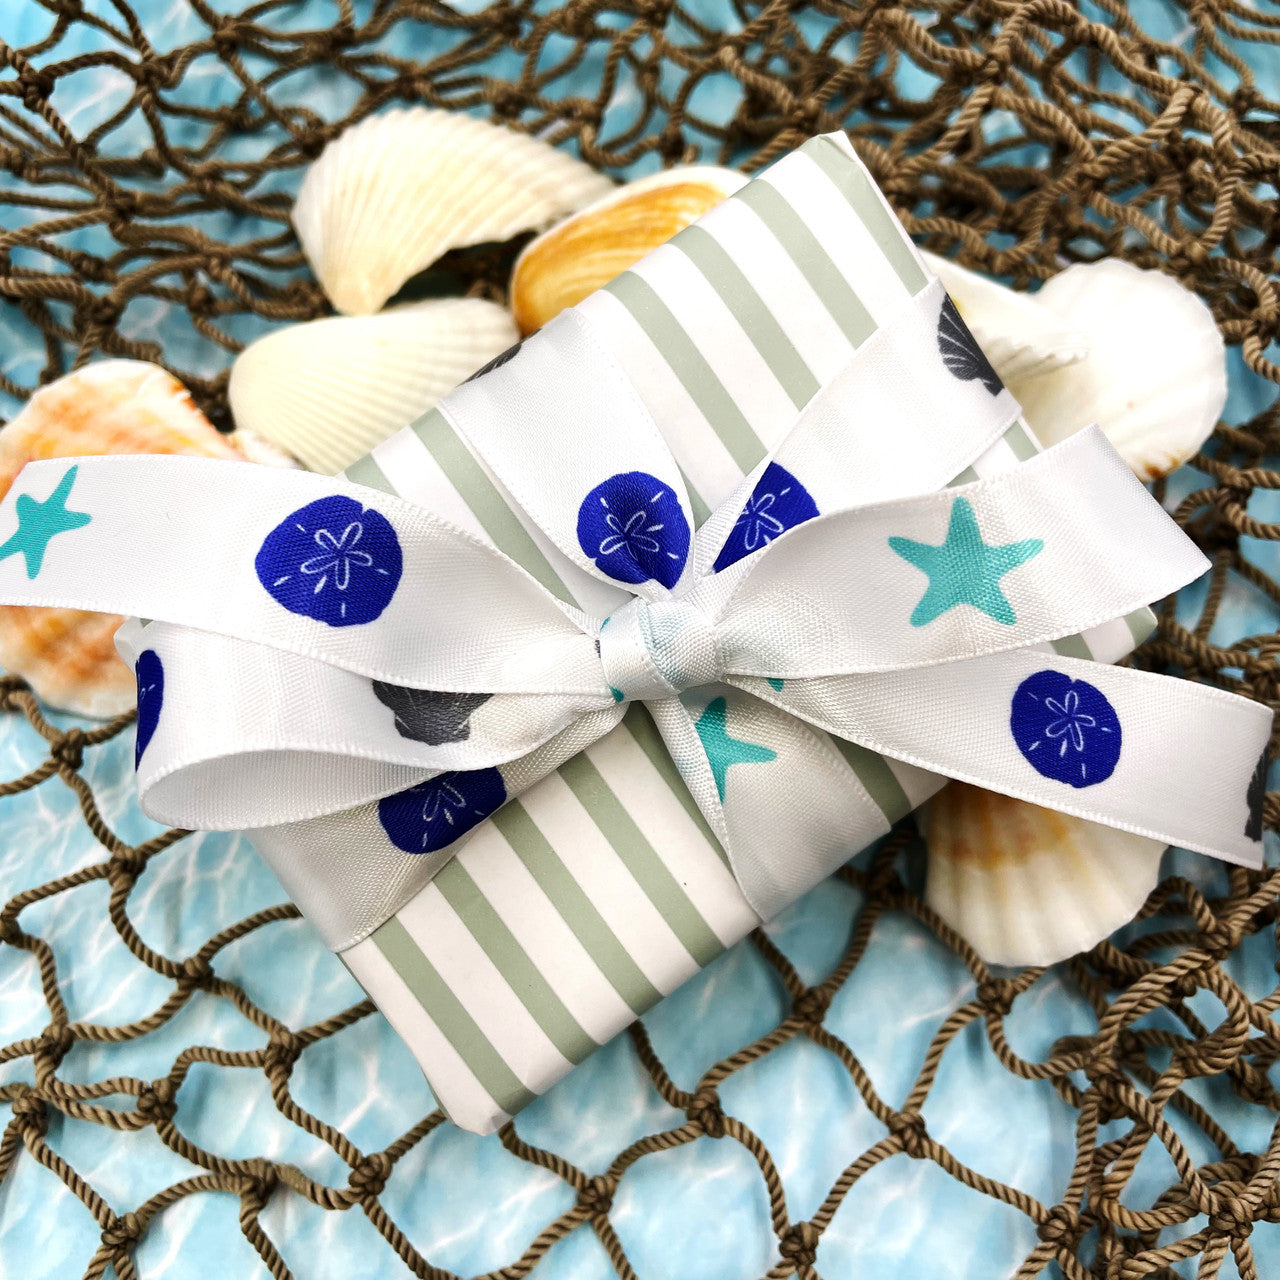 Tie a gift or party favor with our blue and white shell ribbon to complete a beach themed party in style! 